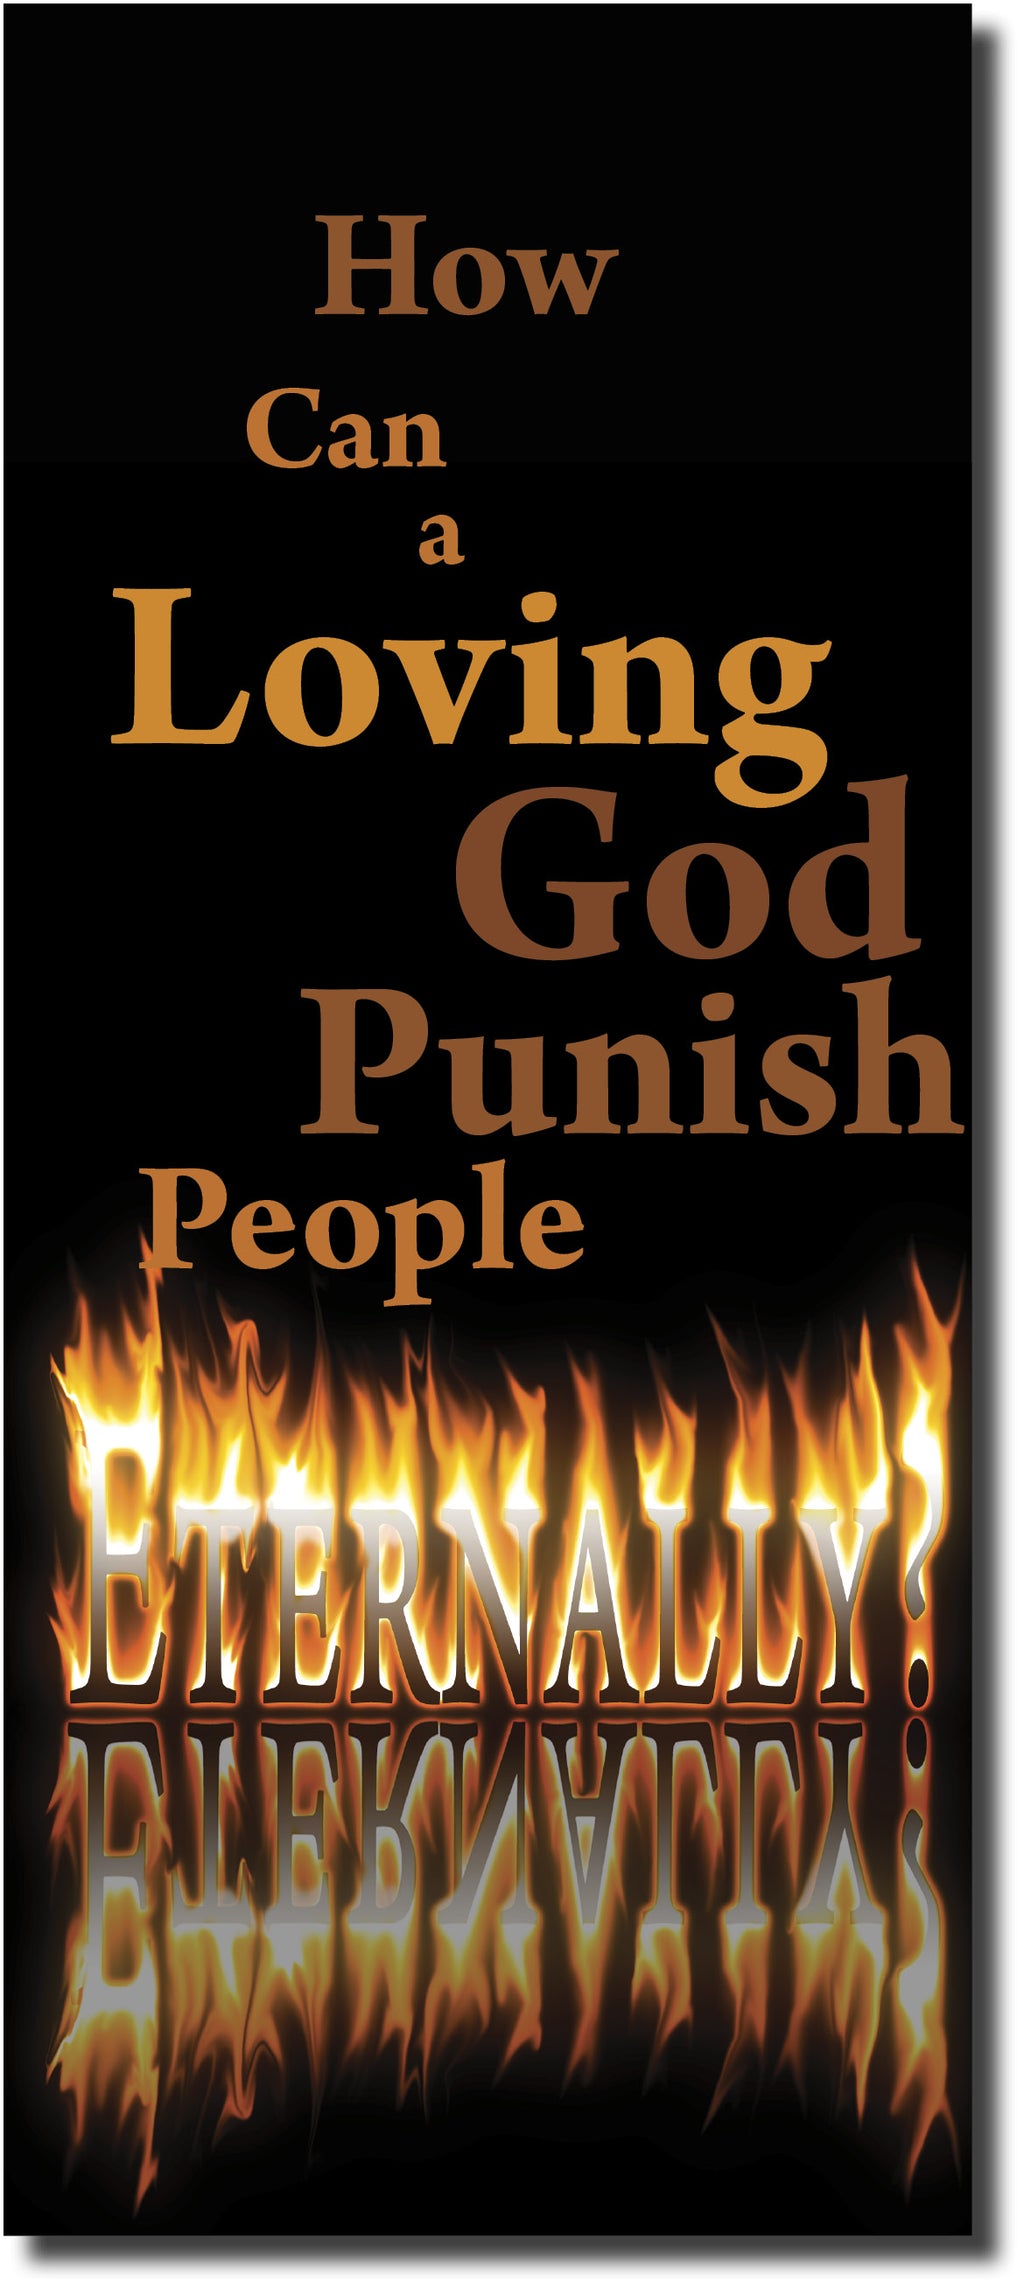 How Can a Loving God Punish People Eternally?